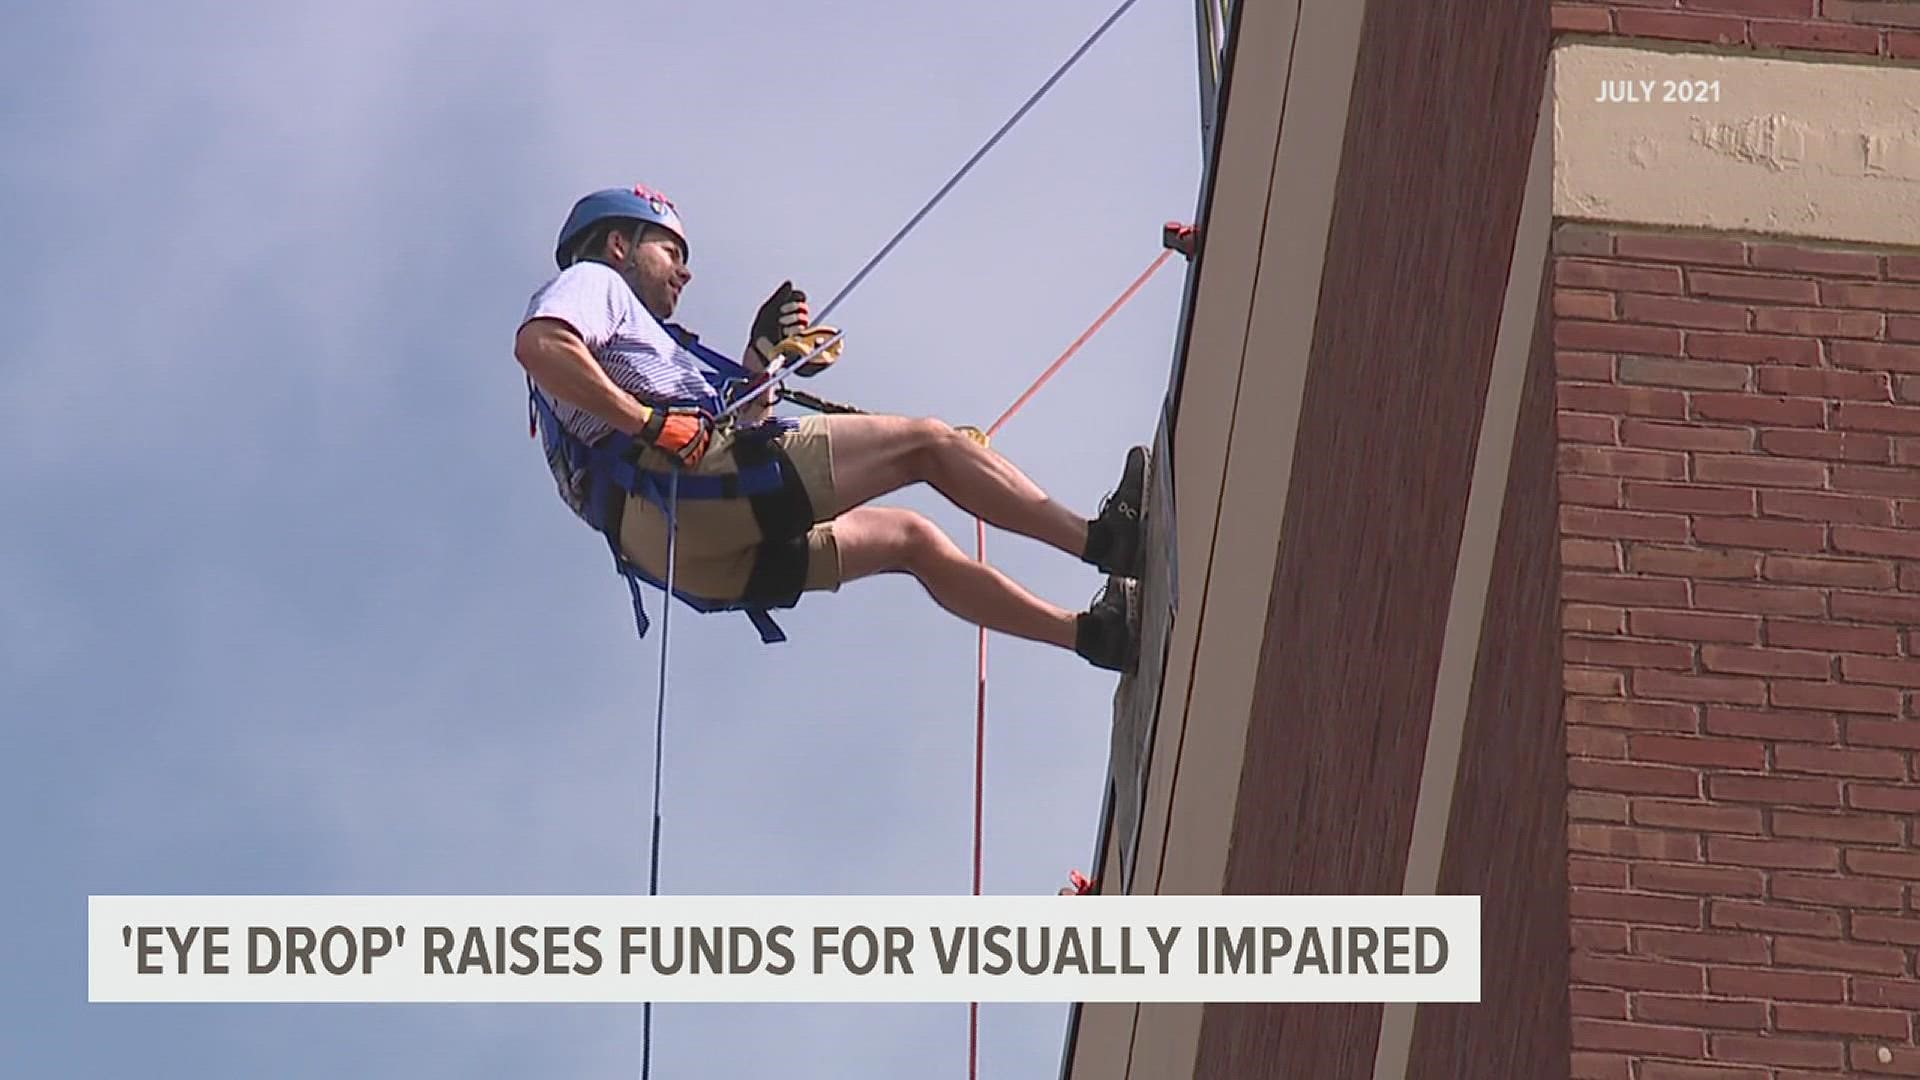 VisionCorps’ third annual Eye Drop event is bringing more than 80 people to rappel down a 10-story building in Lancaster on June 10.